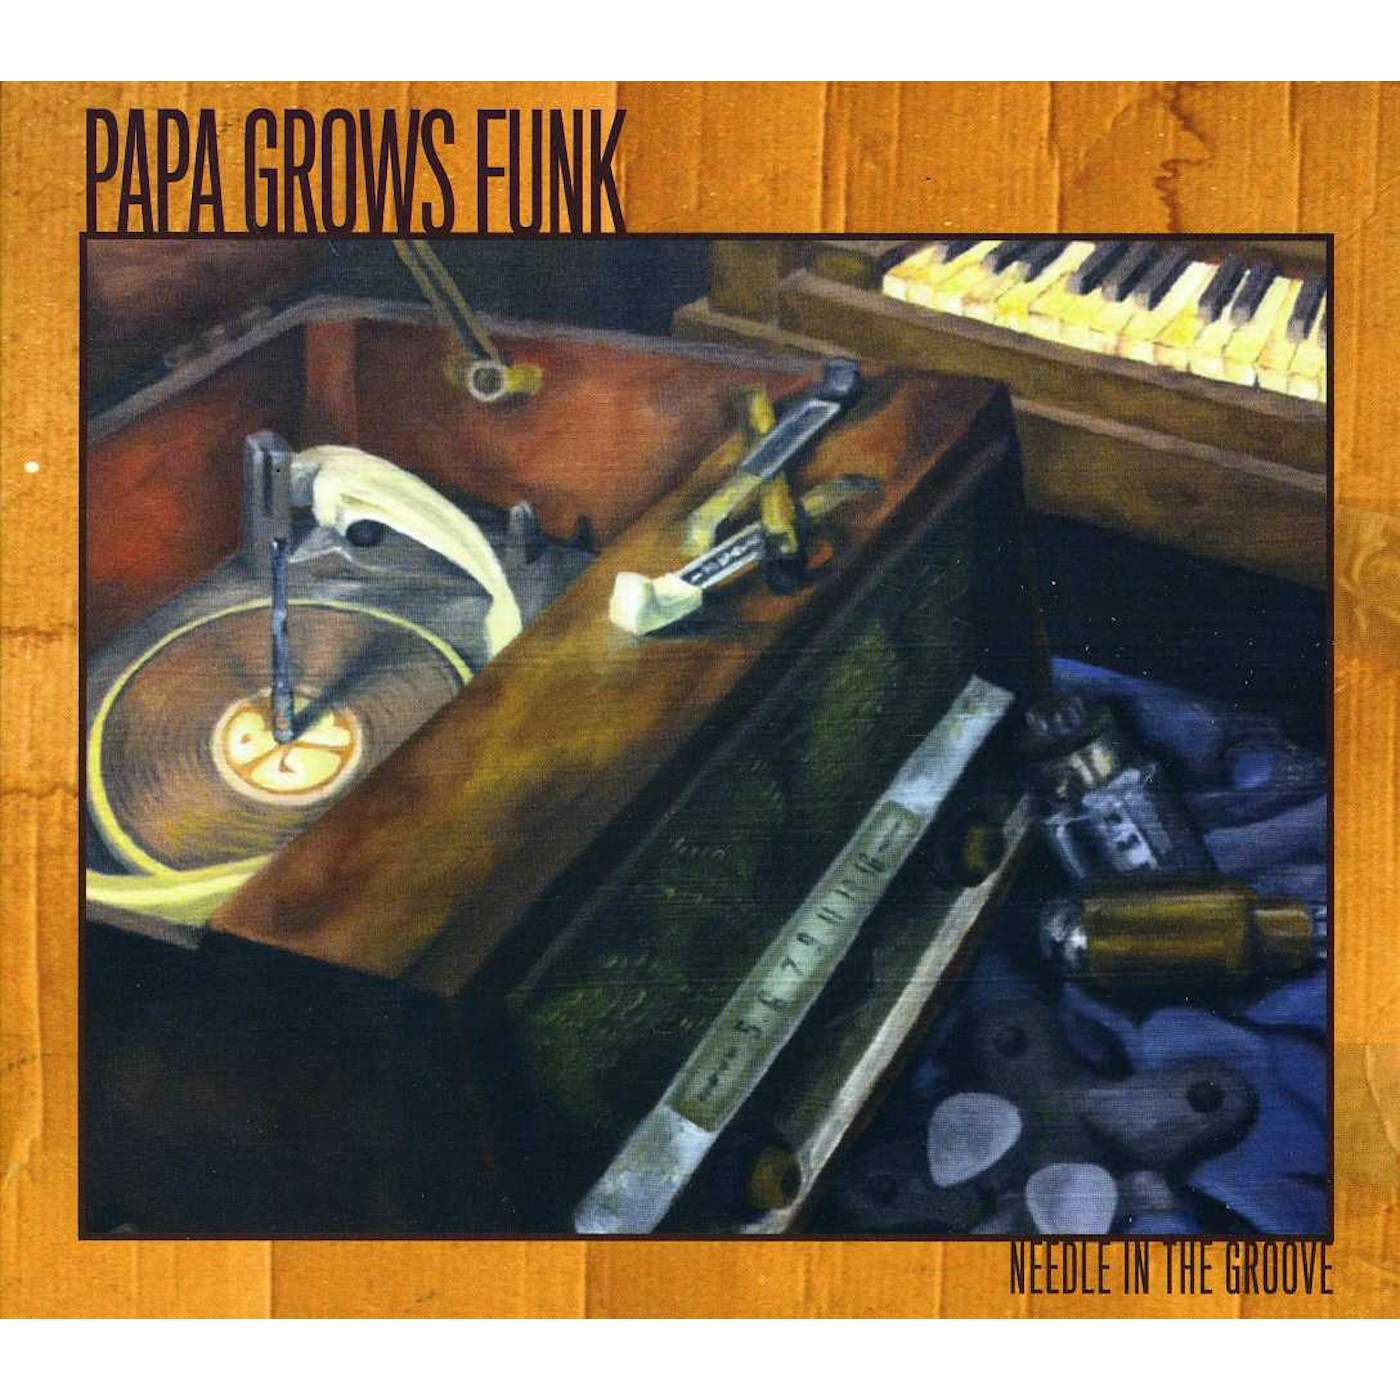 Papa Grows Funk NEEDLE IN THE GROOVE CD